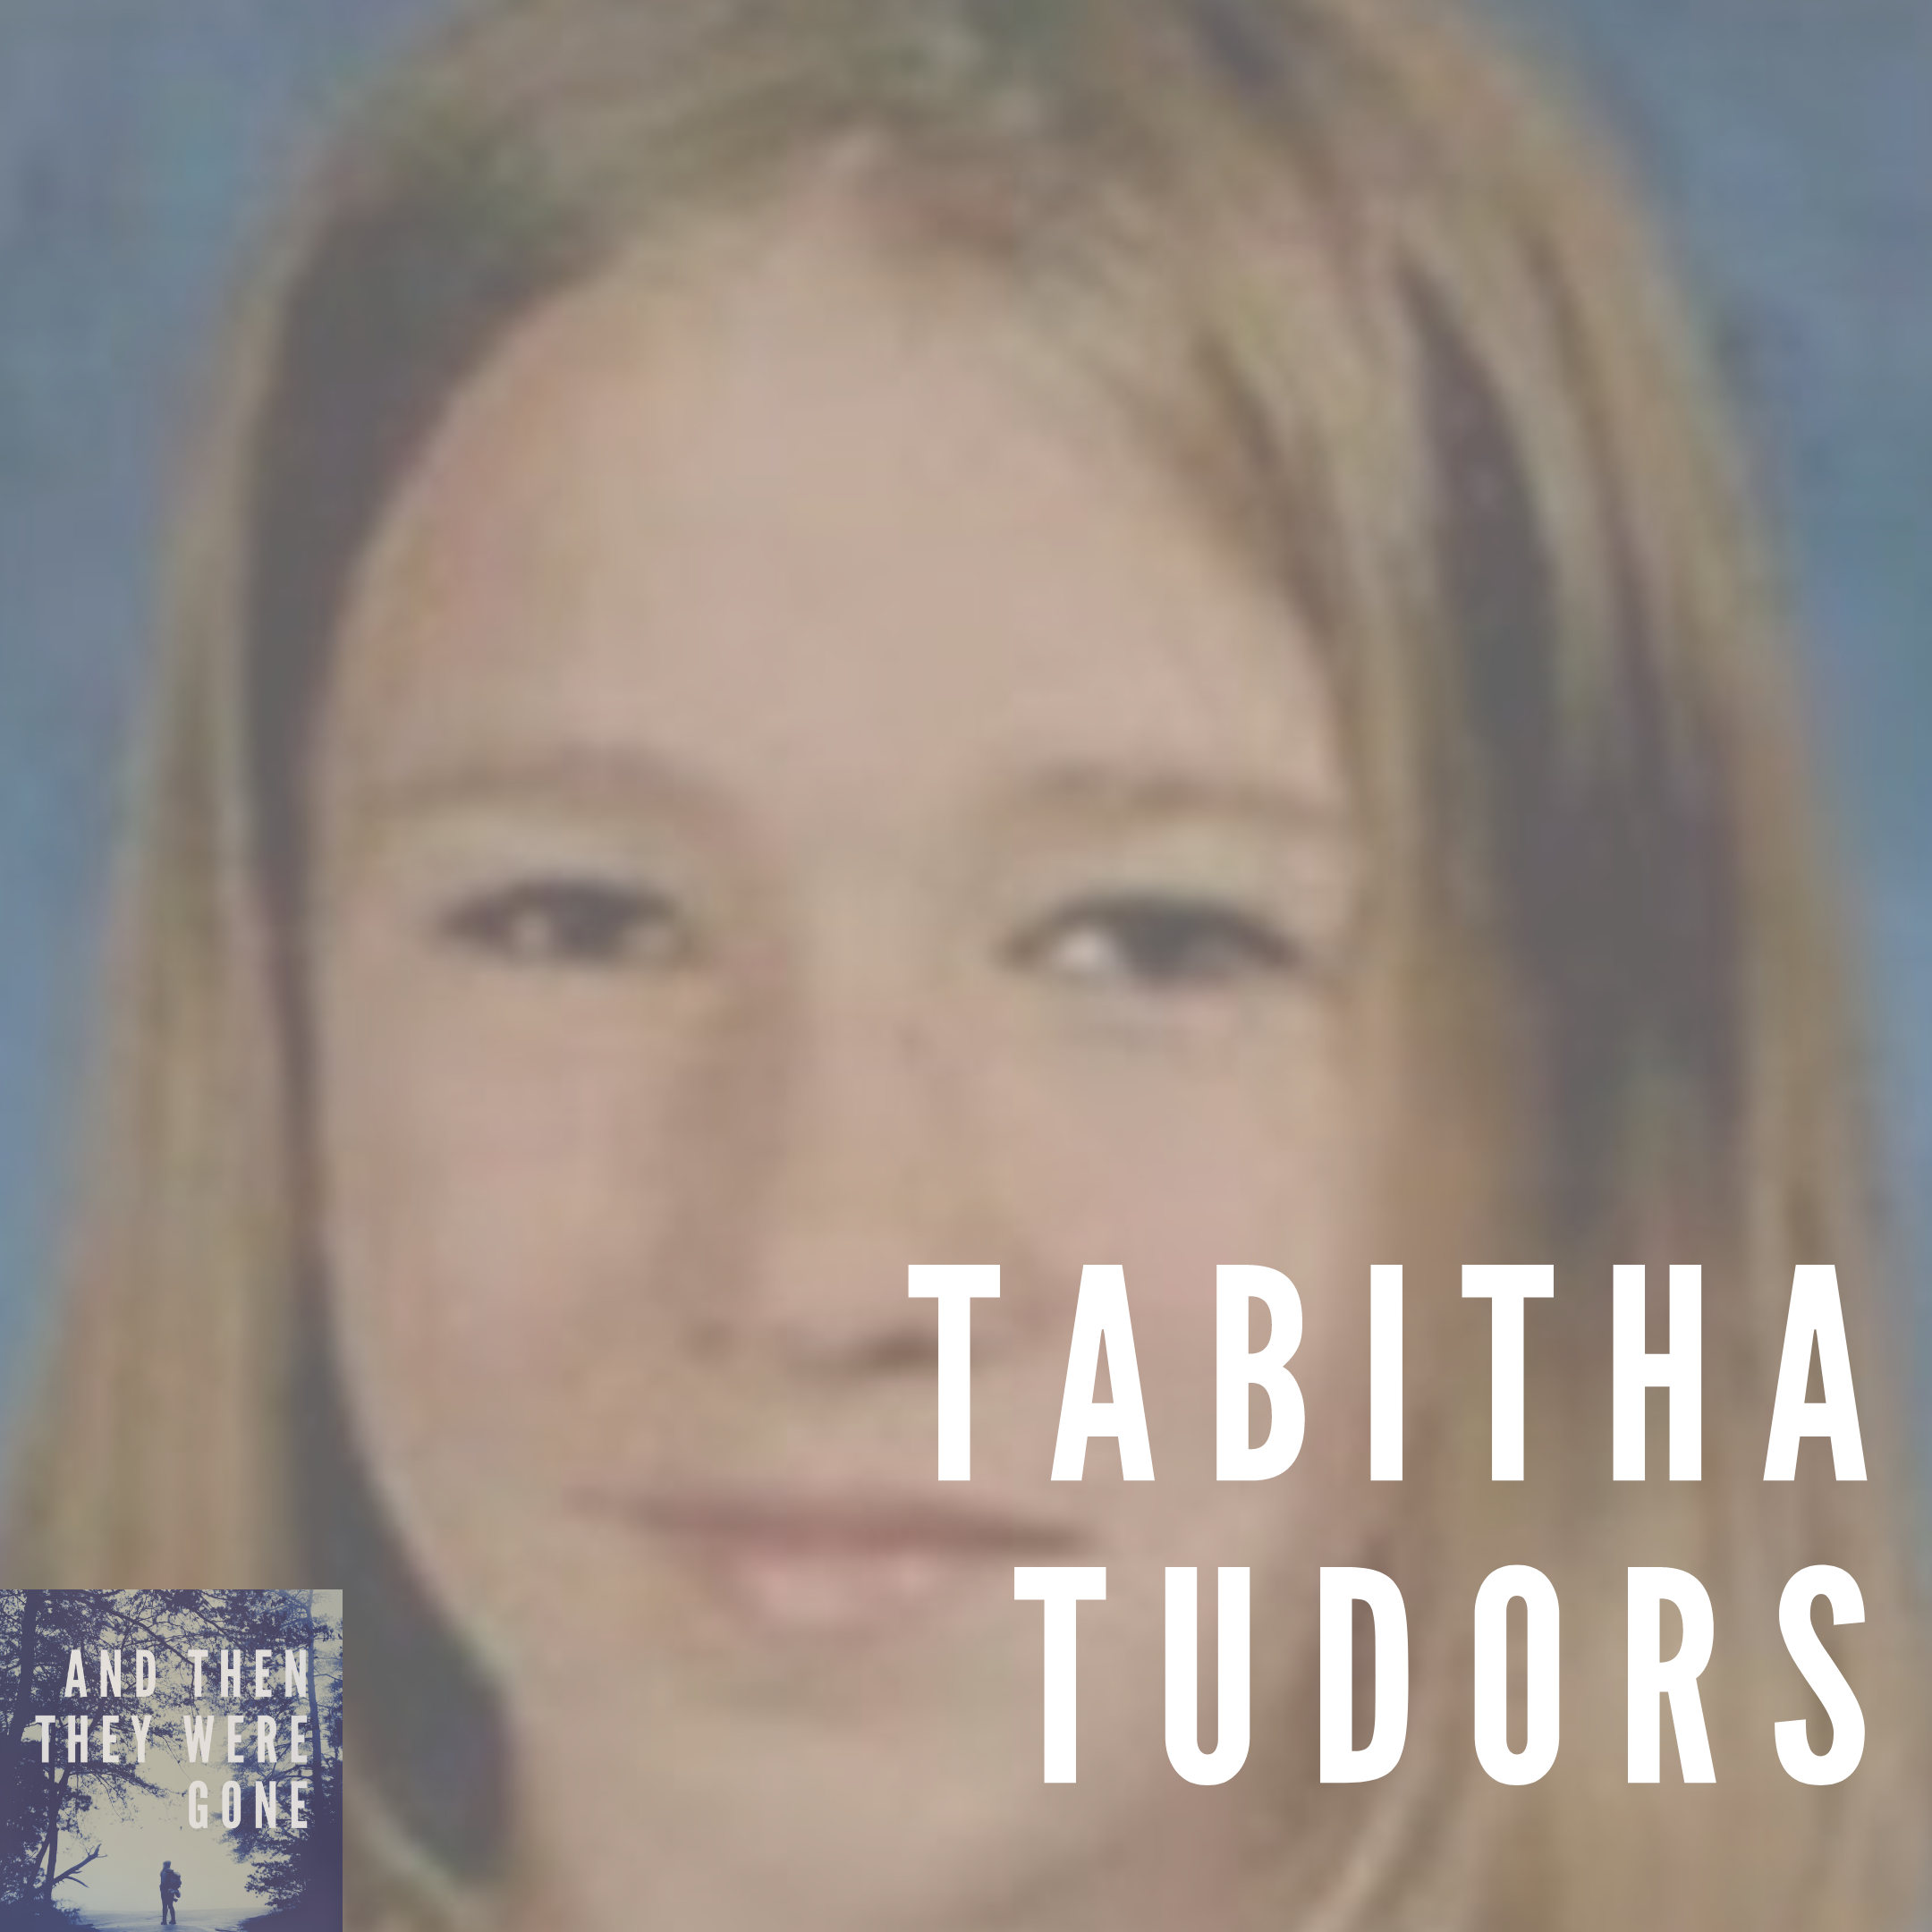 Tabitha Tudors disappeared on the way to her bus stop on April 29, 2003